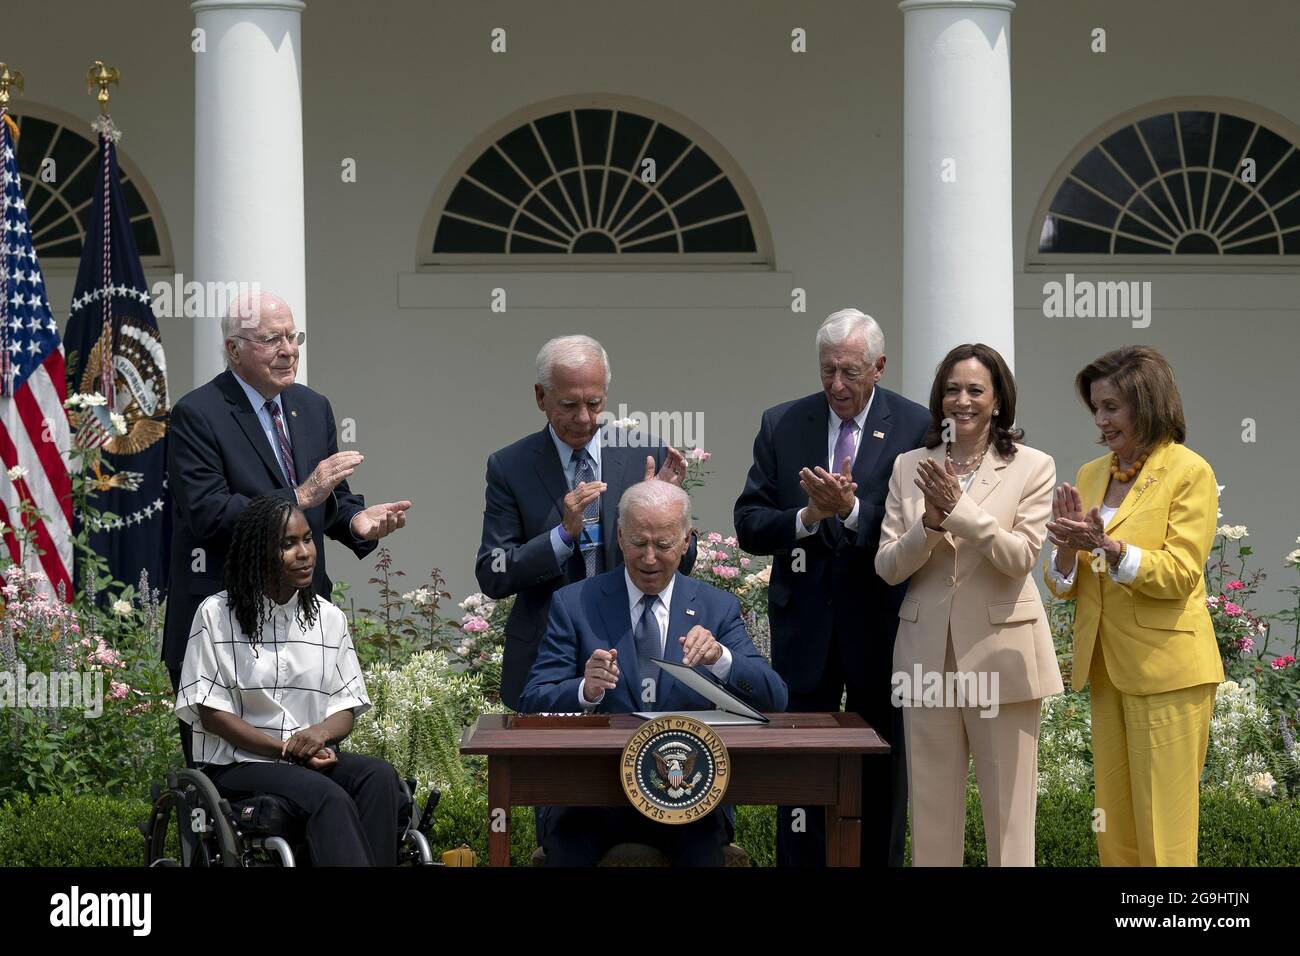 Tyree Brown, from left, Senator Patrick Leahy, a Democrat from Vermont, former Representative Tony Coelho, House Majority Leader Steny Hoyer, a Democrat from Maryland, U.S. Vice President Kamala Harris, and Speaker of the House Nancy Pelosi, a Democrat from California, applaud as U.S. President Joe Biden, center, signs a proclamation during an event marking the 31st anniversary of the Americans with Disabilities Act (ADA) in the Rose Garden of the White House in Washington, DC, U.S., on Monday, July 26, 2021. The Biden administration is keeping foreign travel restrictions in place amid conce Stock Photo